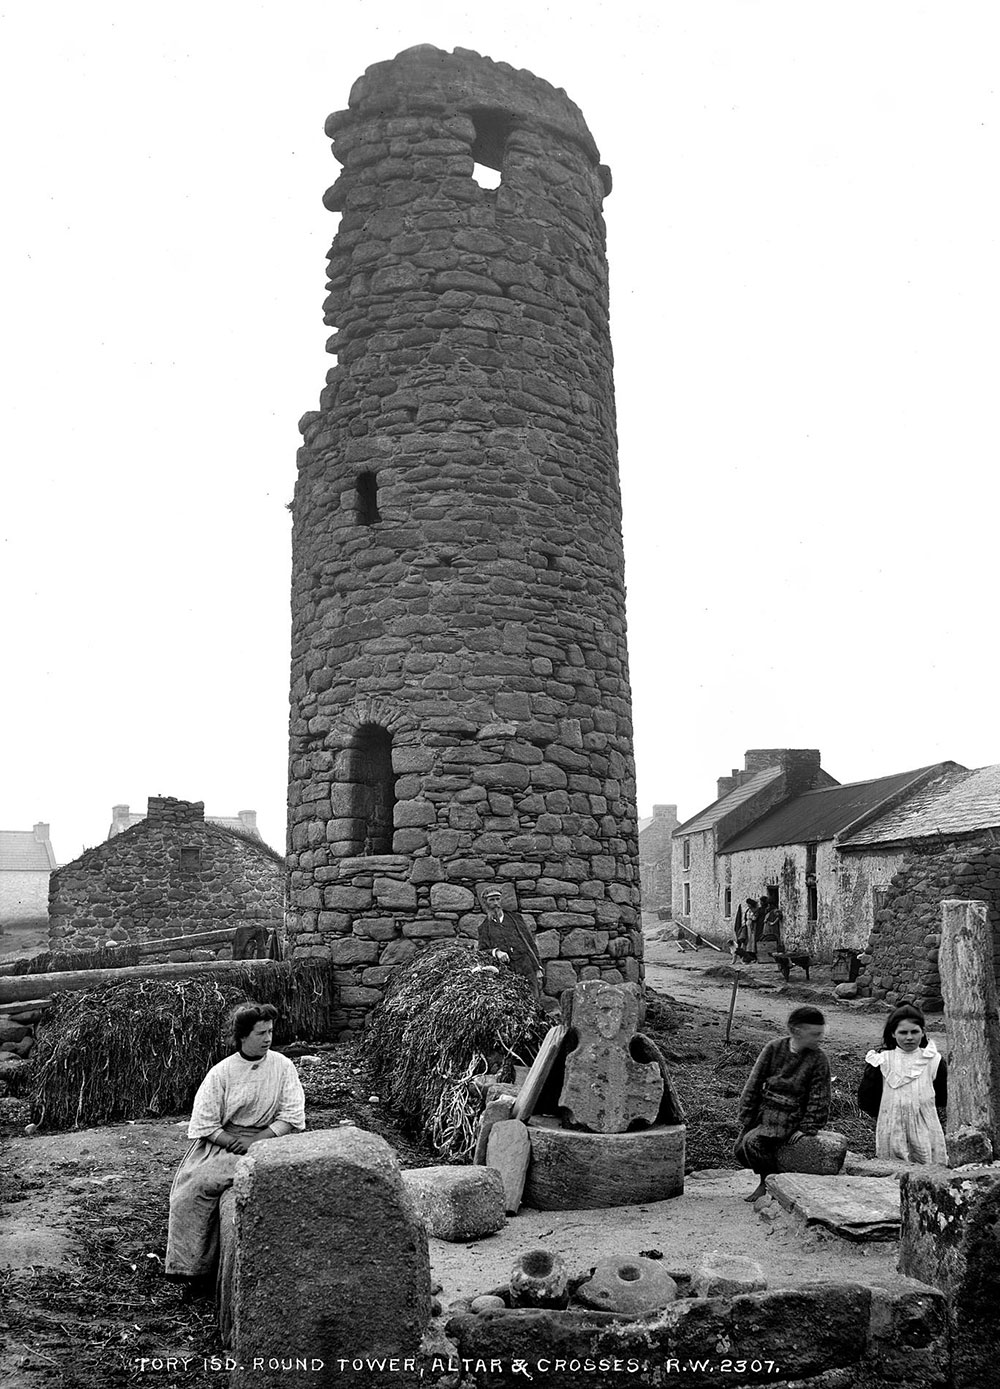 The Round Tower on Tory Island. Photo by Robert Welch.